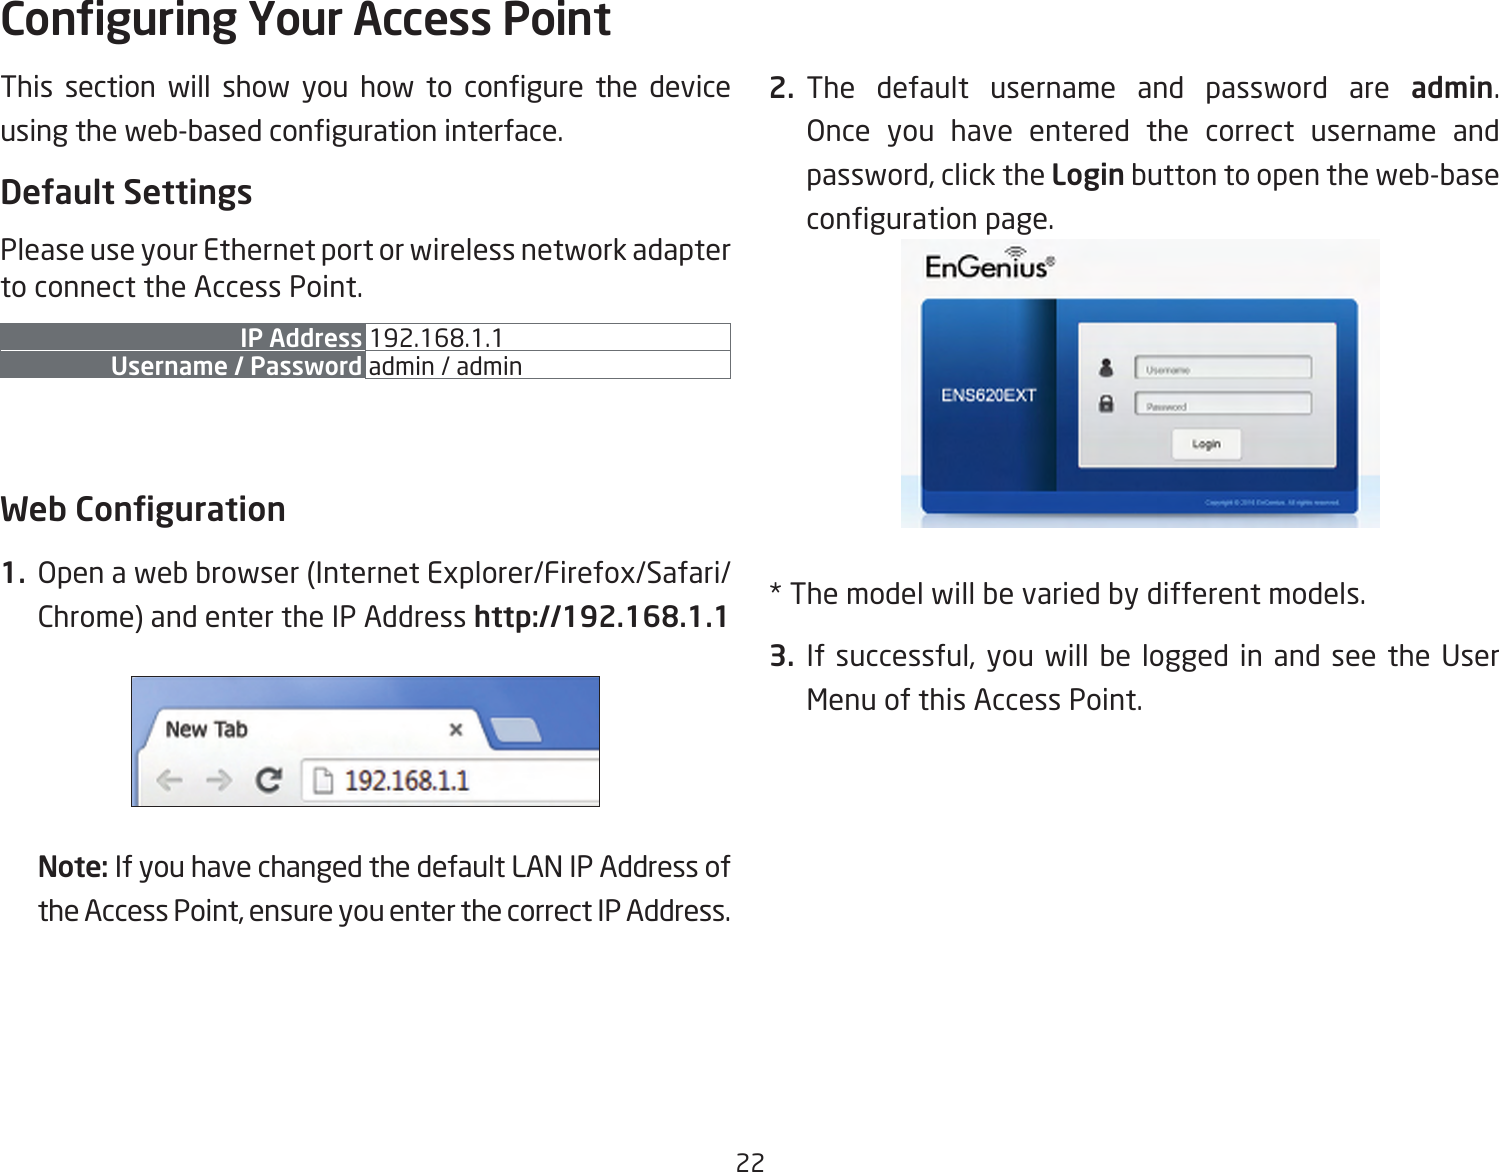 22This section will show you how to congure the deviceusingtheweb-basedcongurationinterface.Default SettingsPlease use your Ethernet port or wireless network adapter to connect the Access Point.IP Address 192.168.1.1Username / Password admin / admin Web Conguration1.  Openawebbrowser(InternetExplorer/Firefox/Safari/Chrome) and enter the IP Address http://192.168.1.1Note: If you have changed the default LAN IP Address of the Access Point, ensure you enter the correct IP Address.2. The default username and password are admin. Once you have entered the correct username andpassword, click the Login button to open the web-base congurationpage.* The model will be varied by different models.3. Ifsuccessful,youwillbe loggedin andsee theUserMenu of this Access Point.Conguring Your Access Point